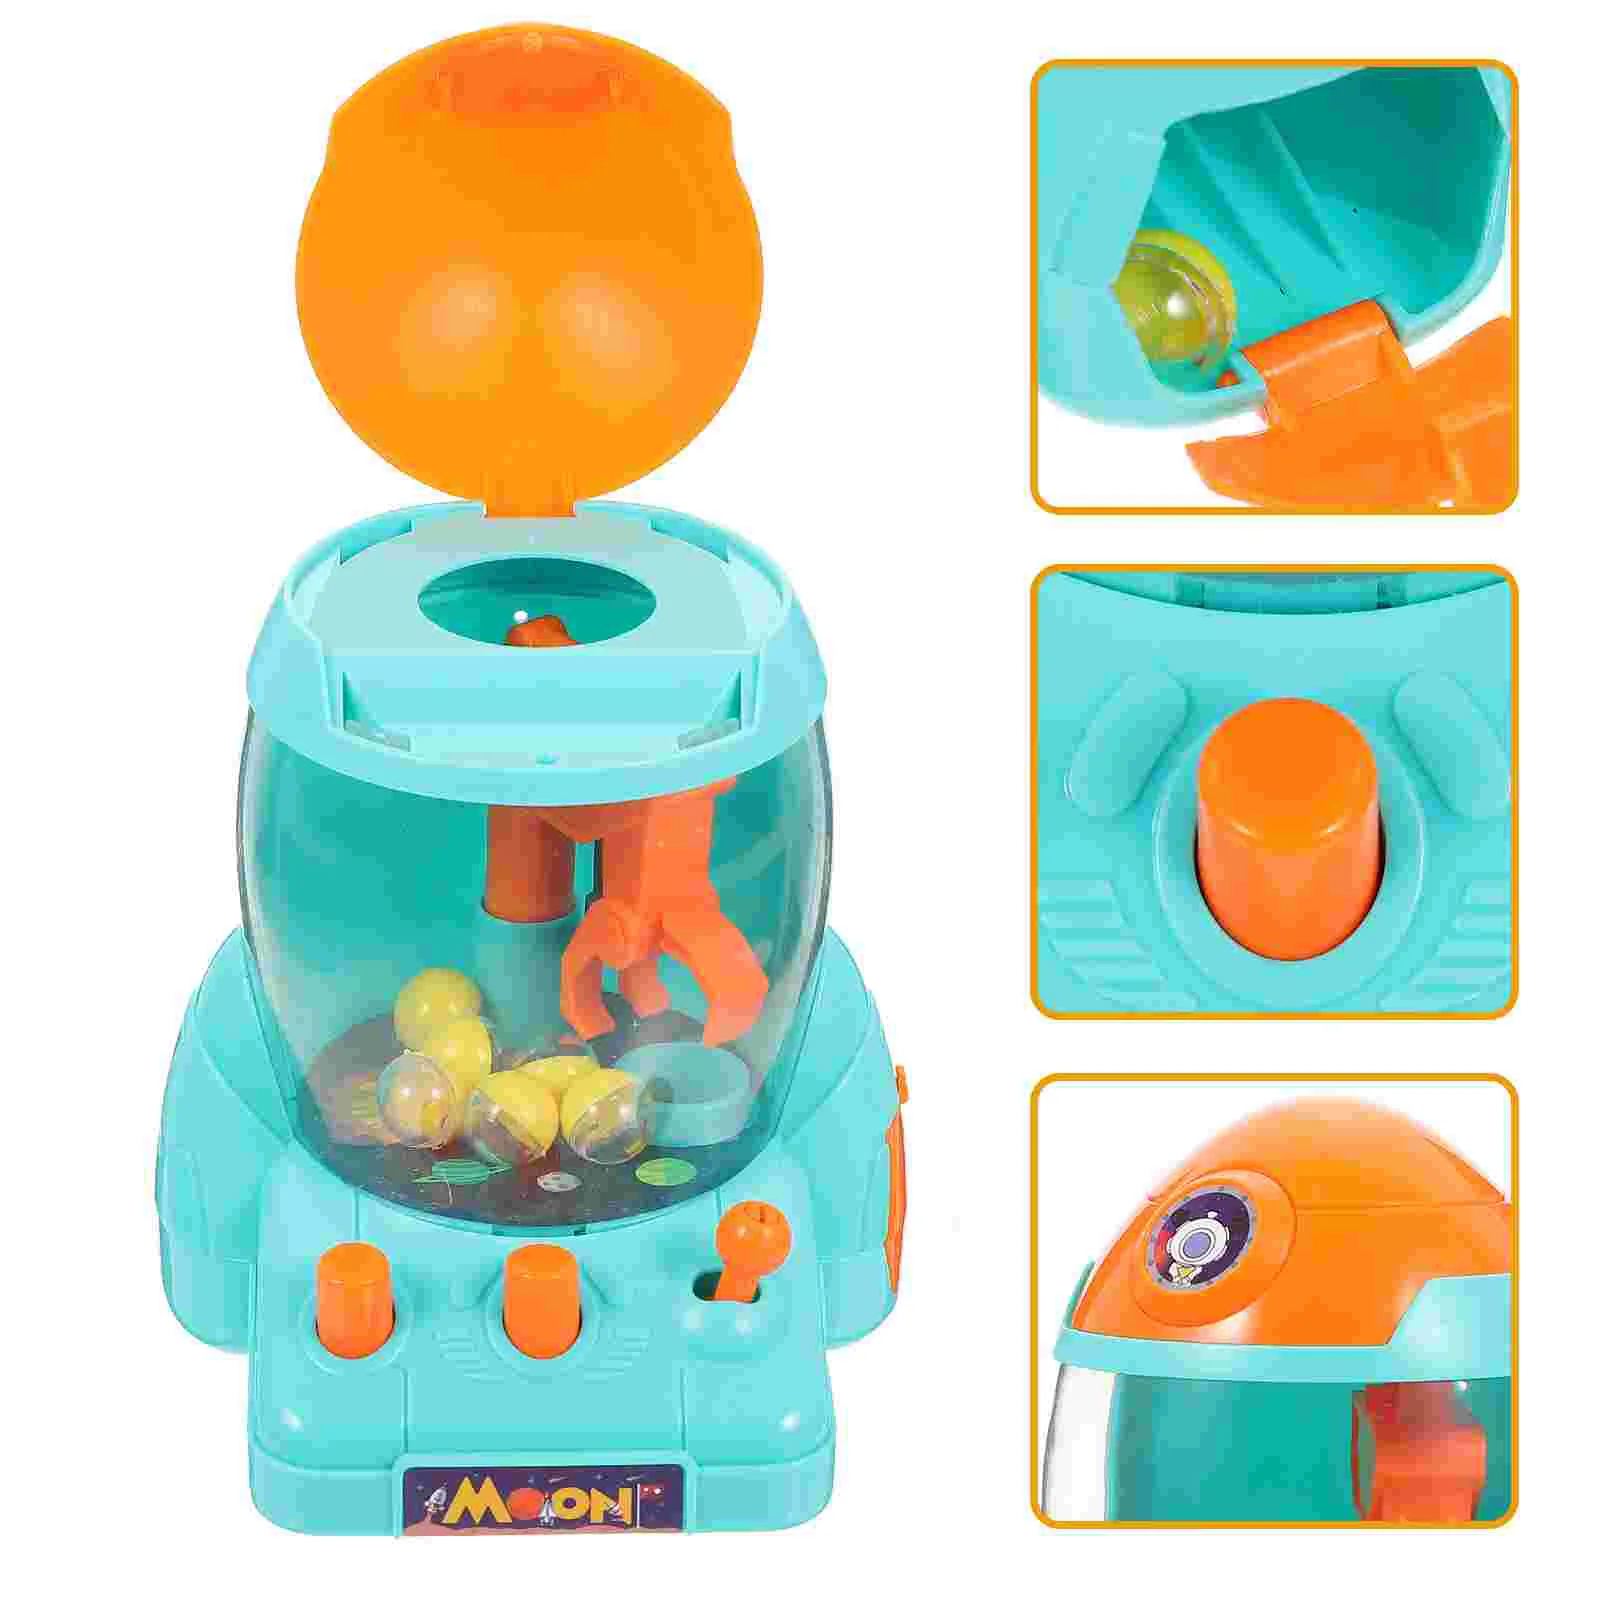 

Machine Claw Toy Kids Mini Toys Catch Arcade Catcher Game Novelty Party Tiny Vending Toddler Machines Interactive Stuff